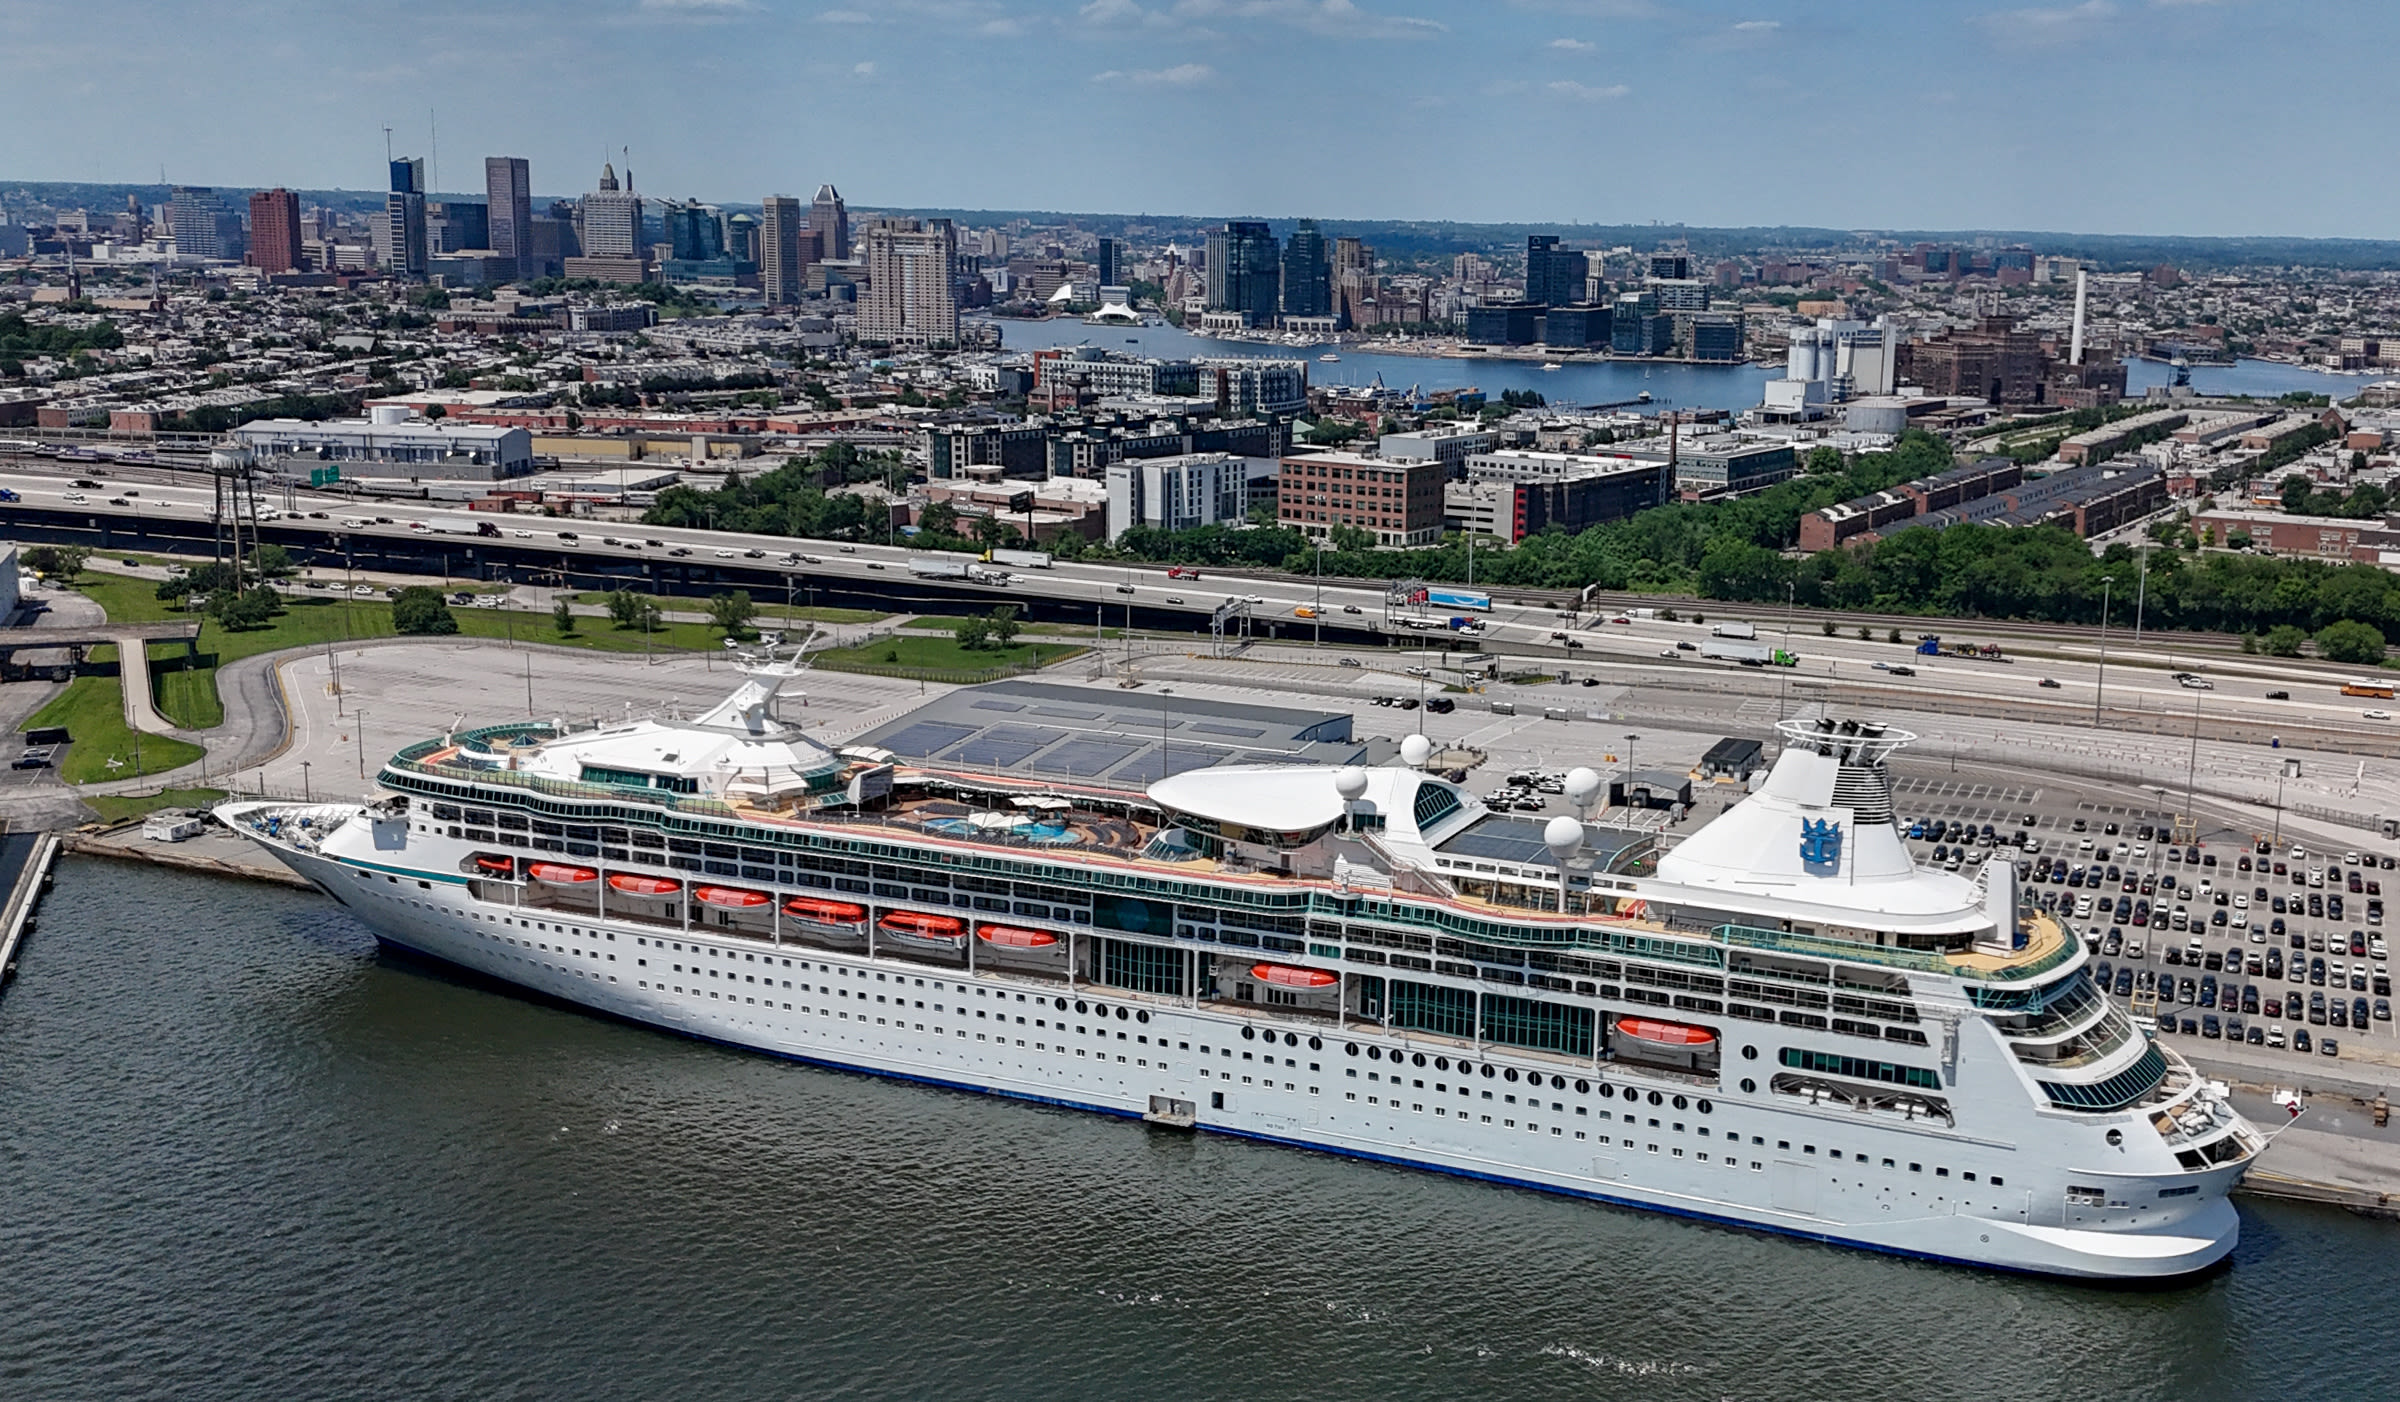 First cruise ship sets sail from Port of Baltimore since Key Bridge collapse: ‘It’s a good day’